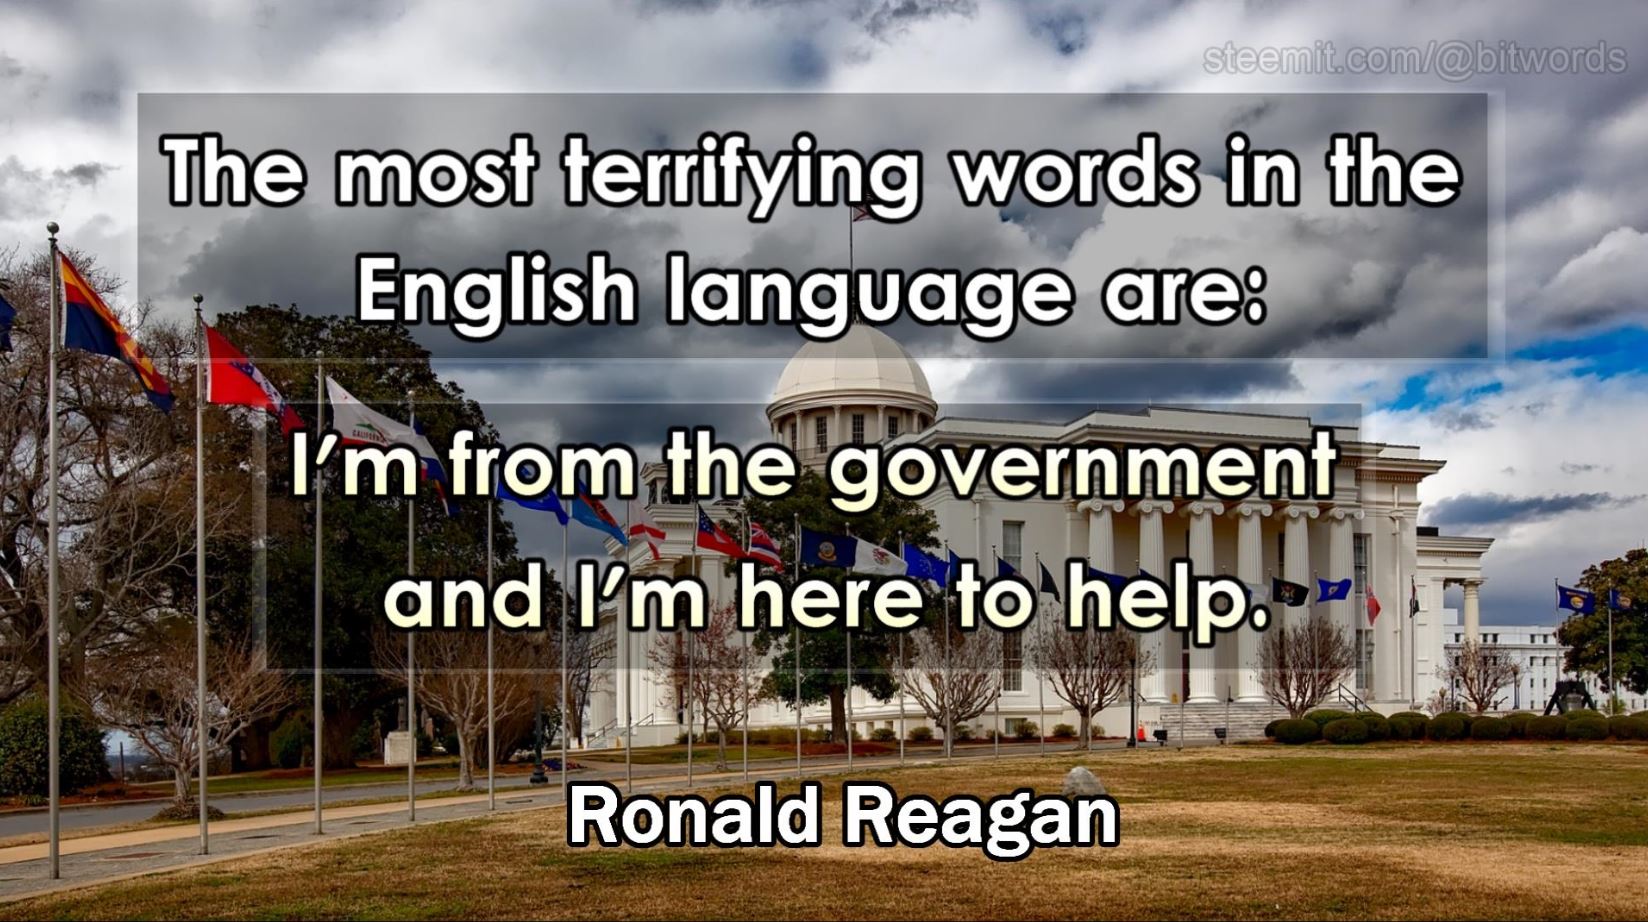 bitwords steemit quote of the day Ronald Reagan.jpg